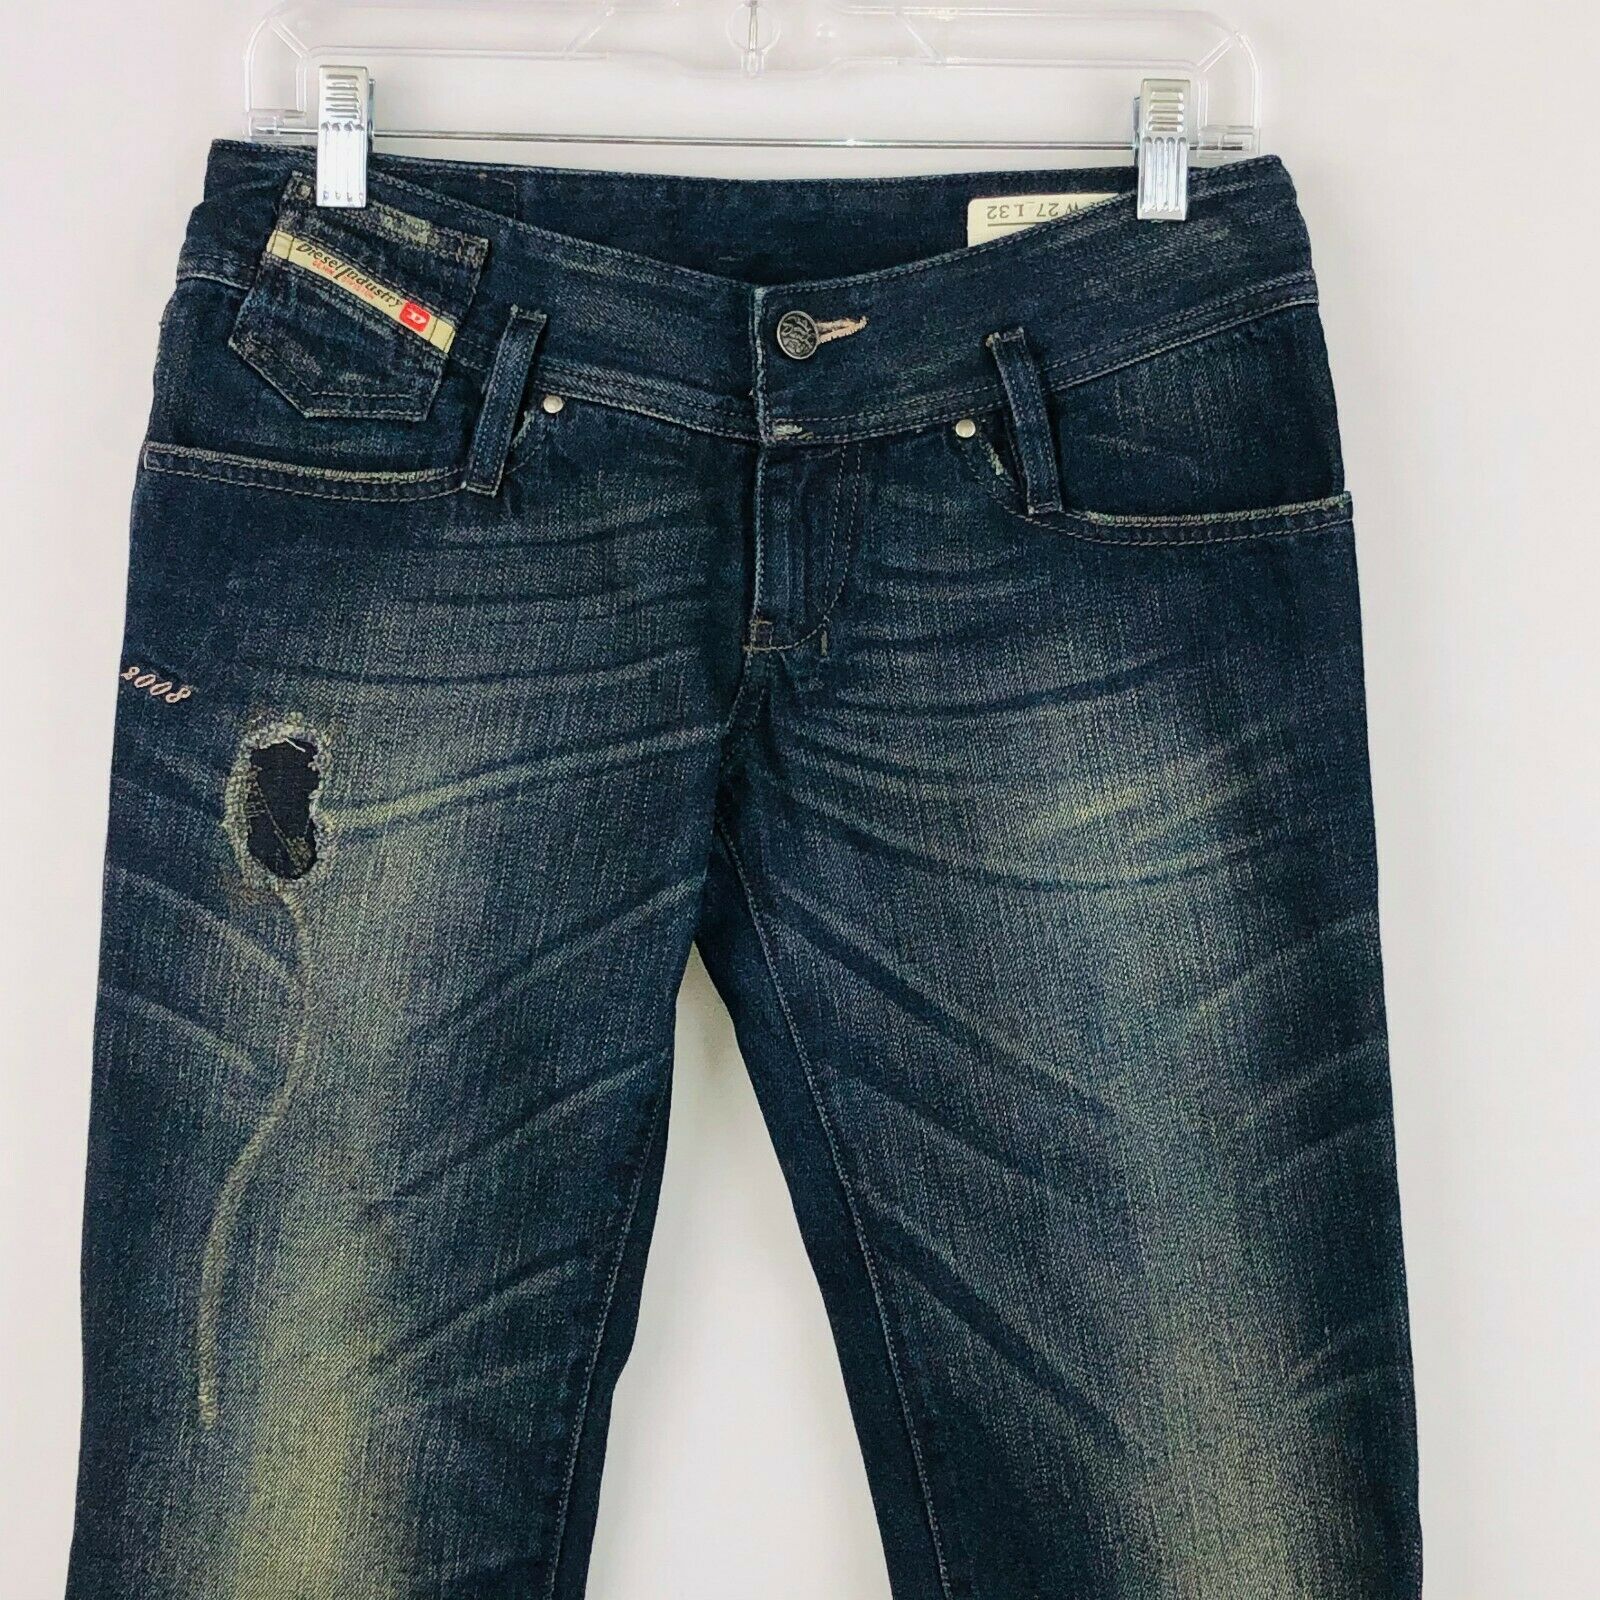 Rare Diesel Matic Jeans Dirty Thirty 008UJ 27 X 32 New - Jeans